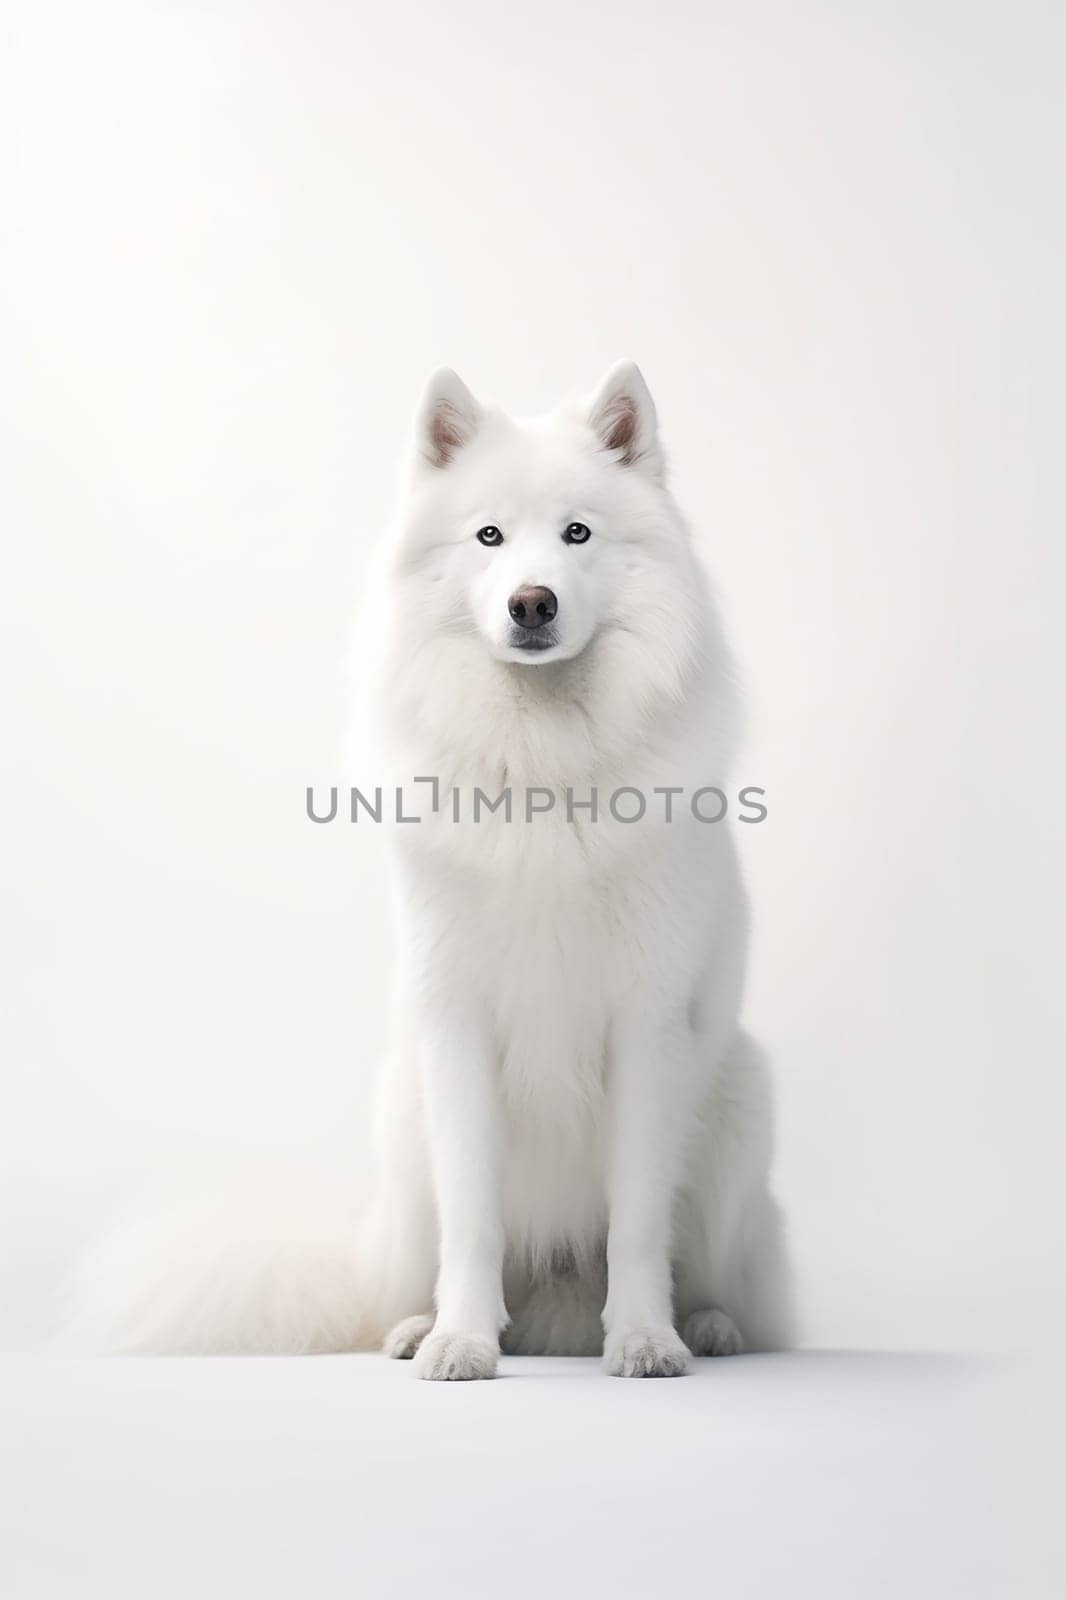 A wild adult artic wolf, whitewolf on a white neutral background